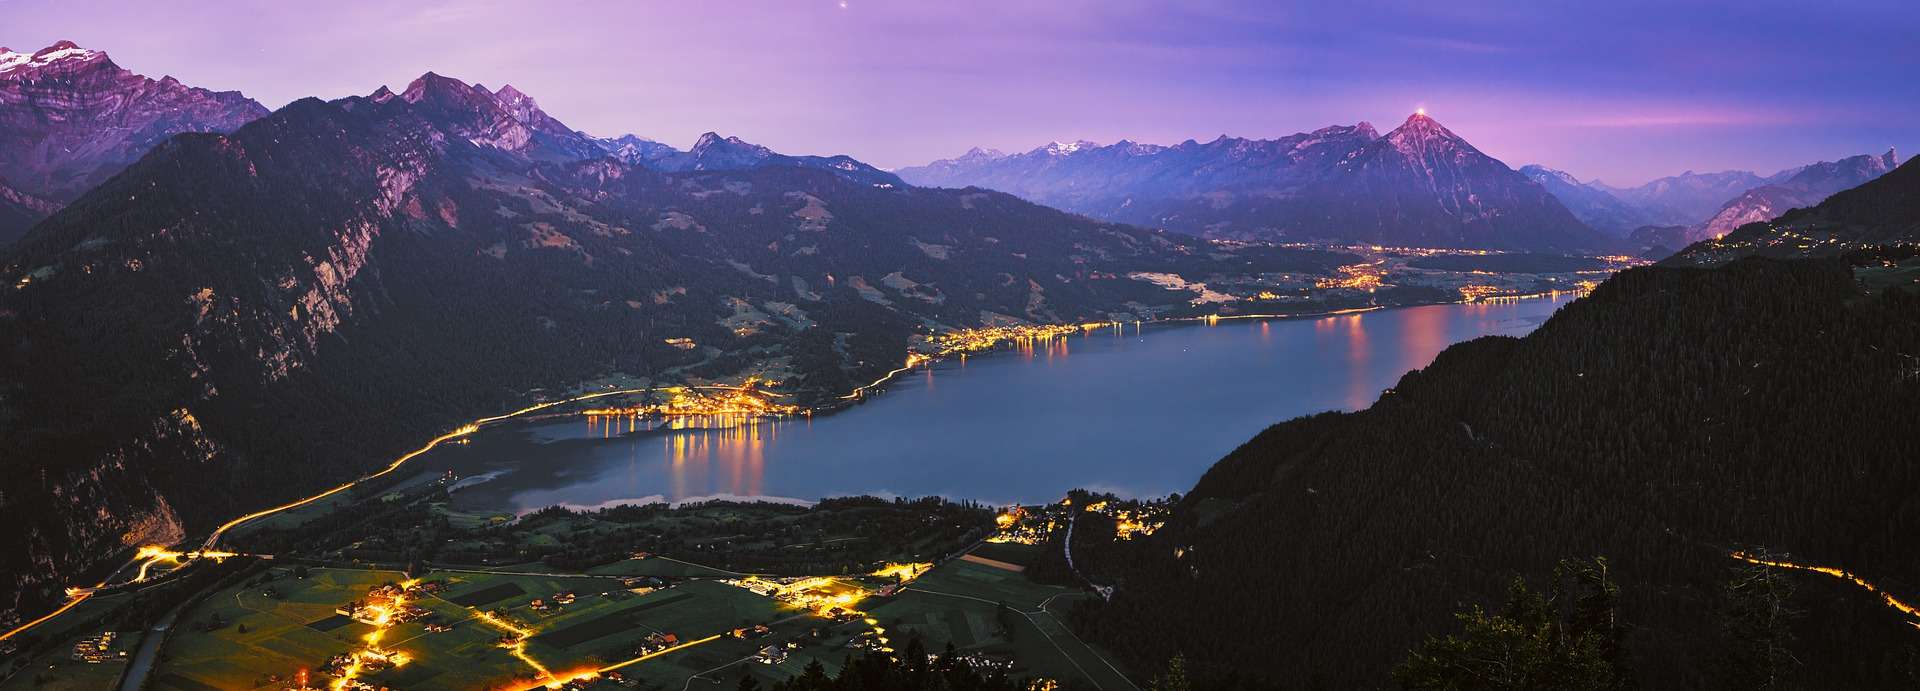 Holidays in the Bernese Oberland